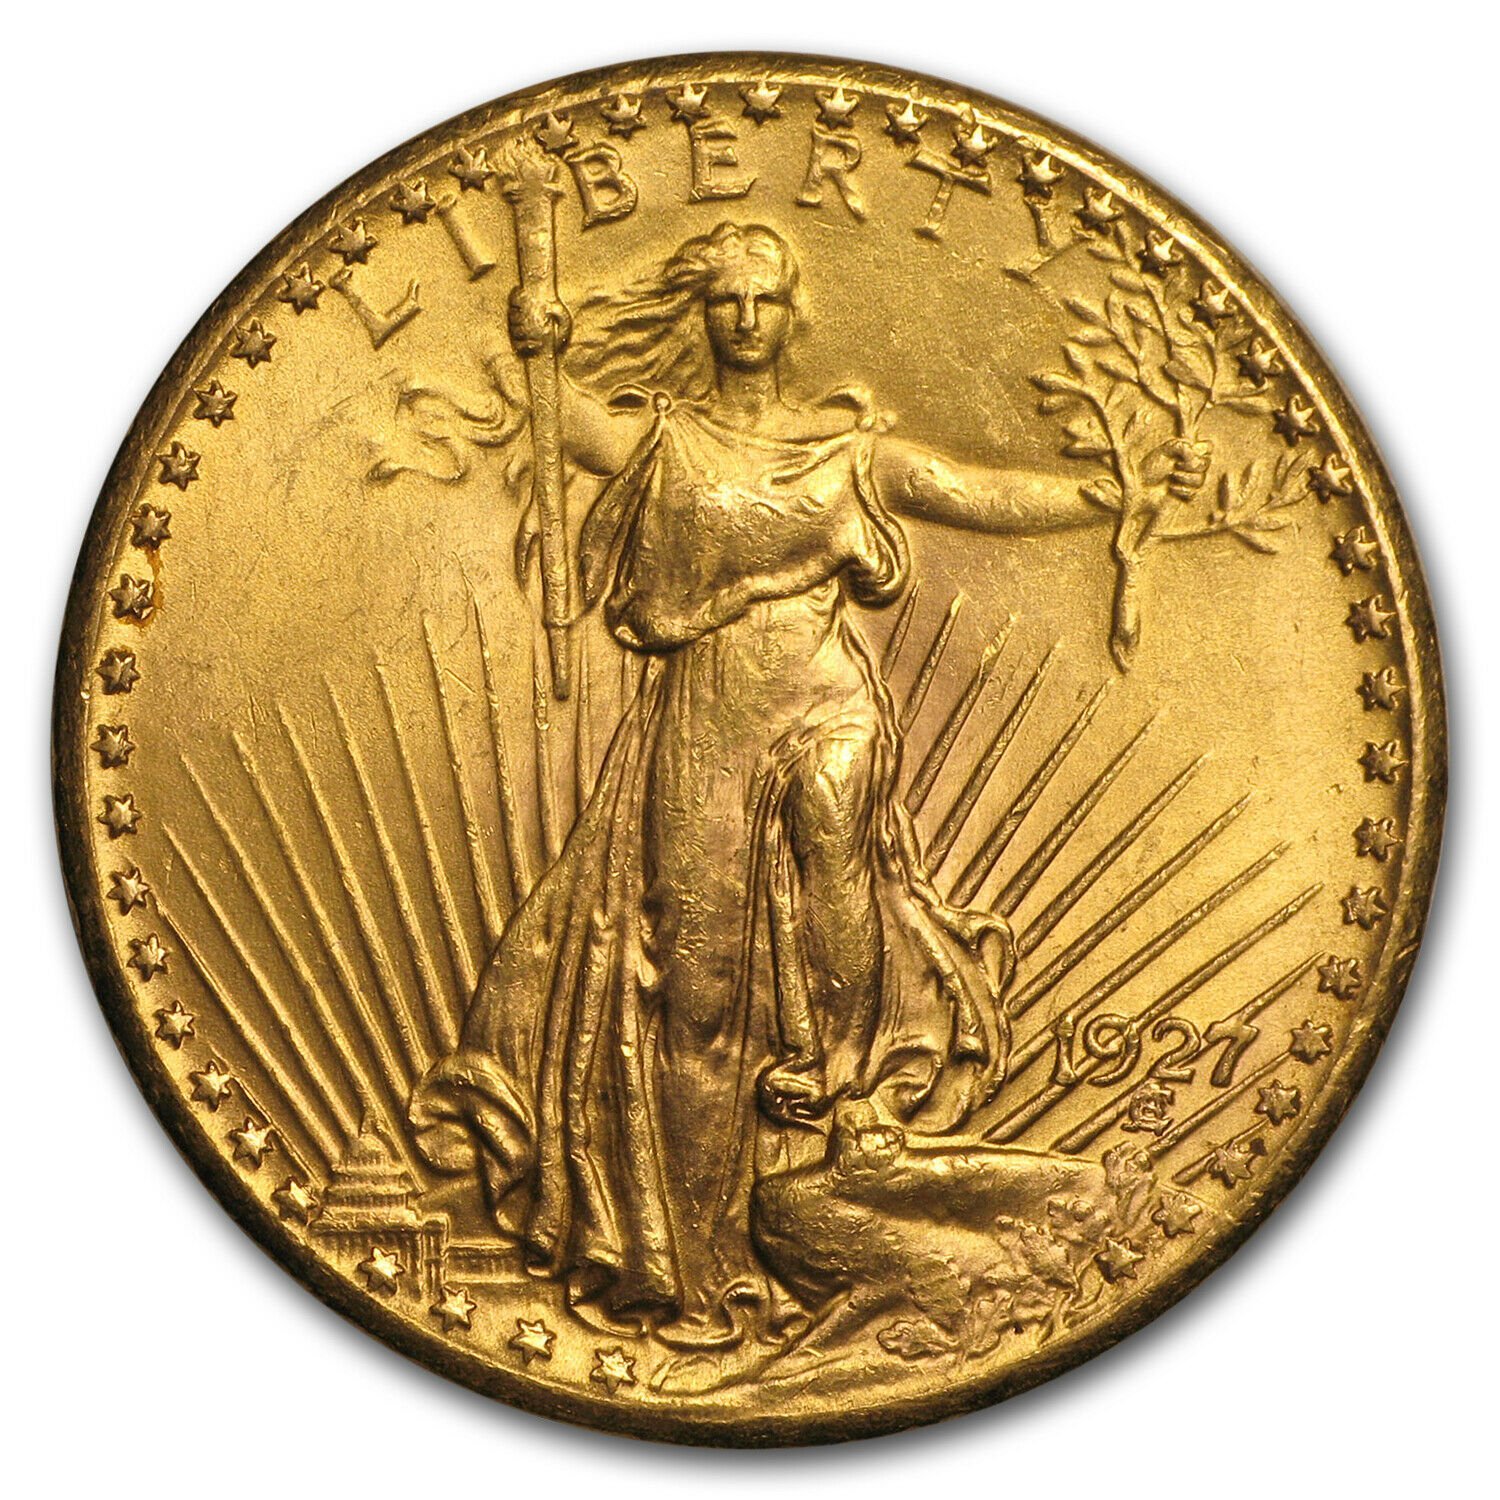 What's a great rare coin you got for a great price? : r/coins